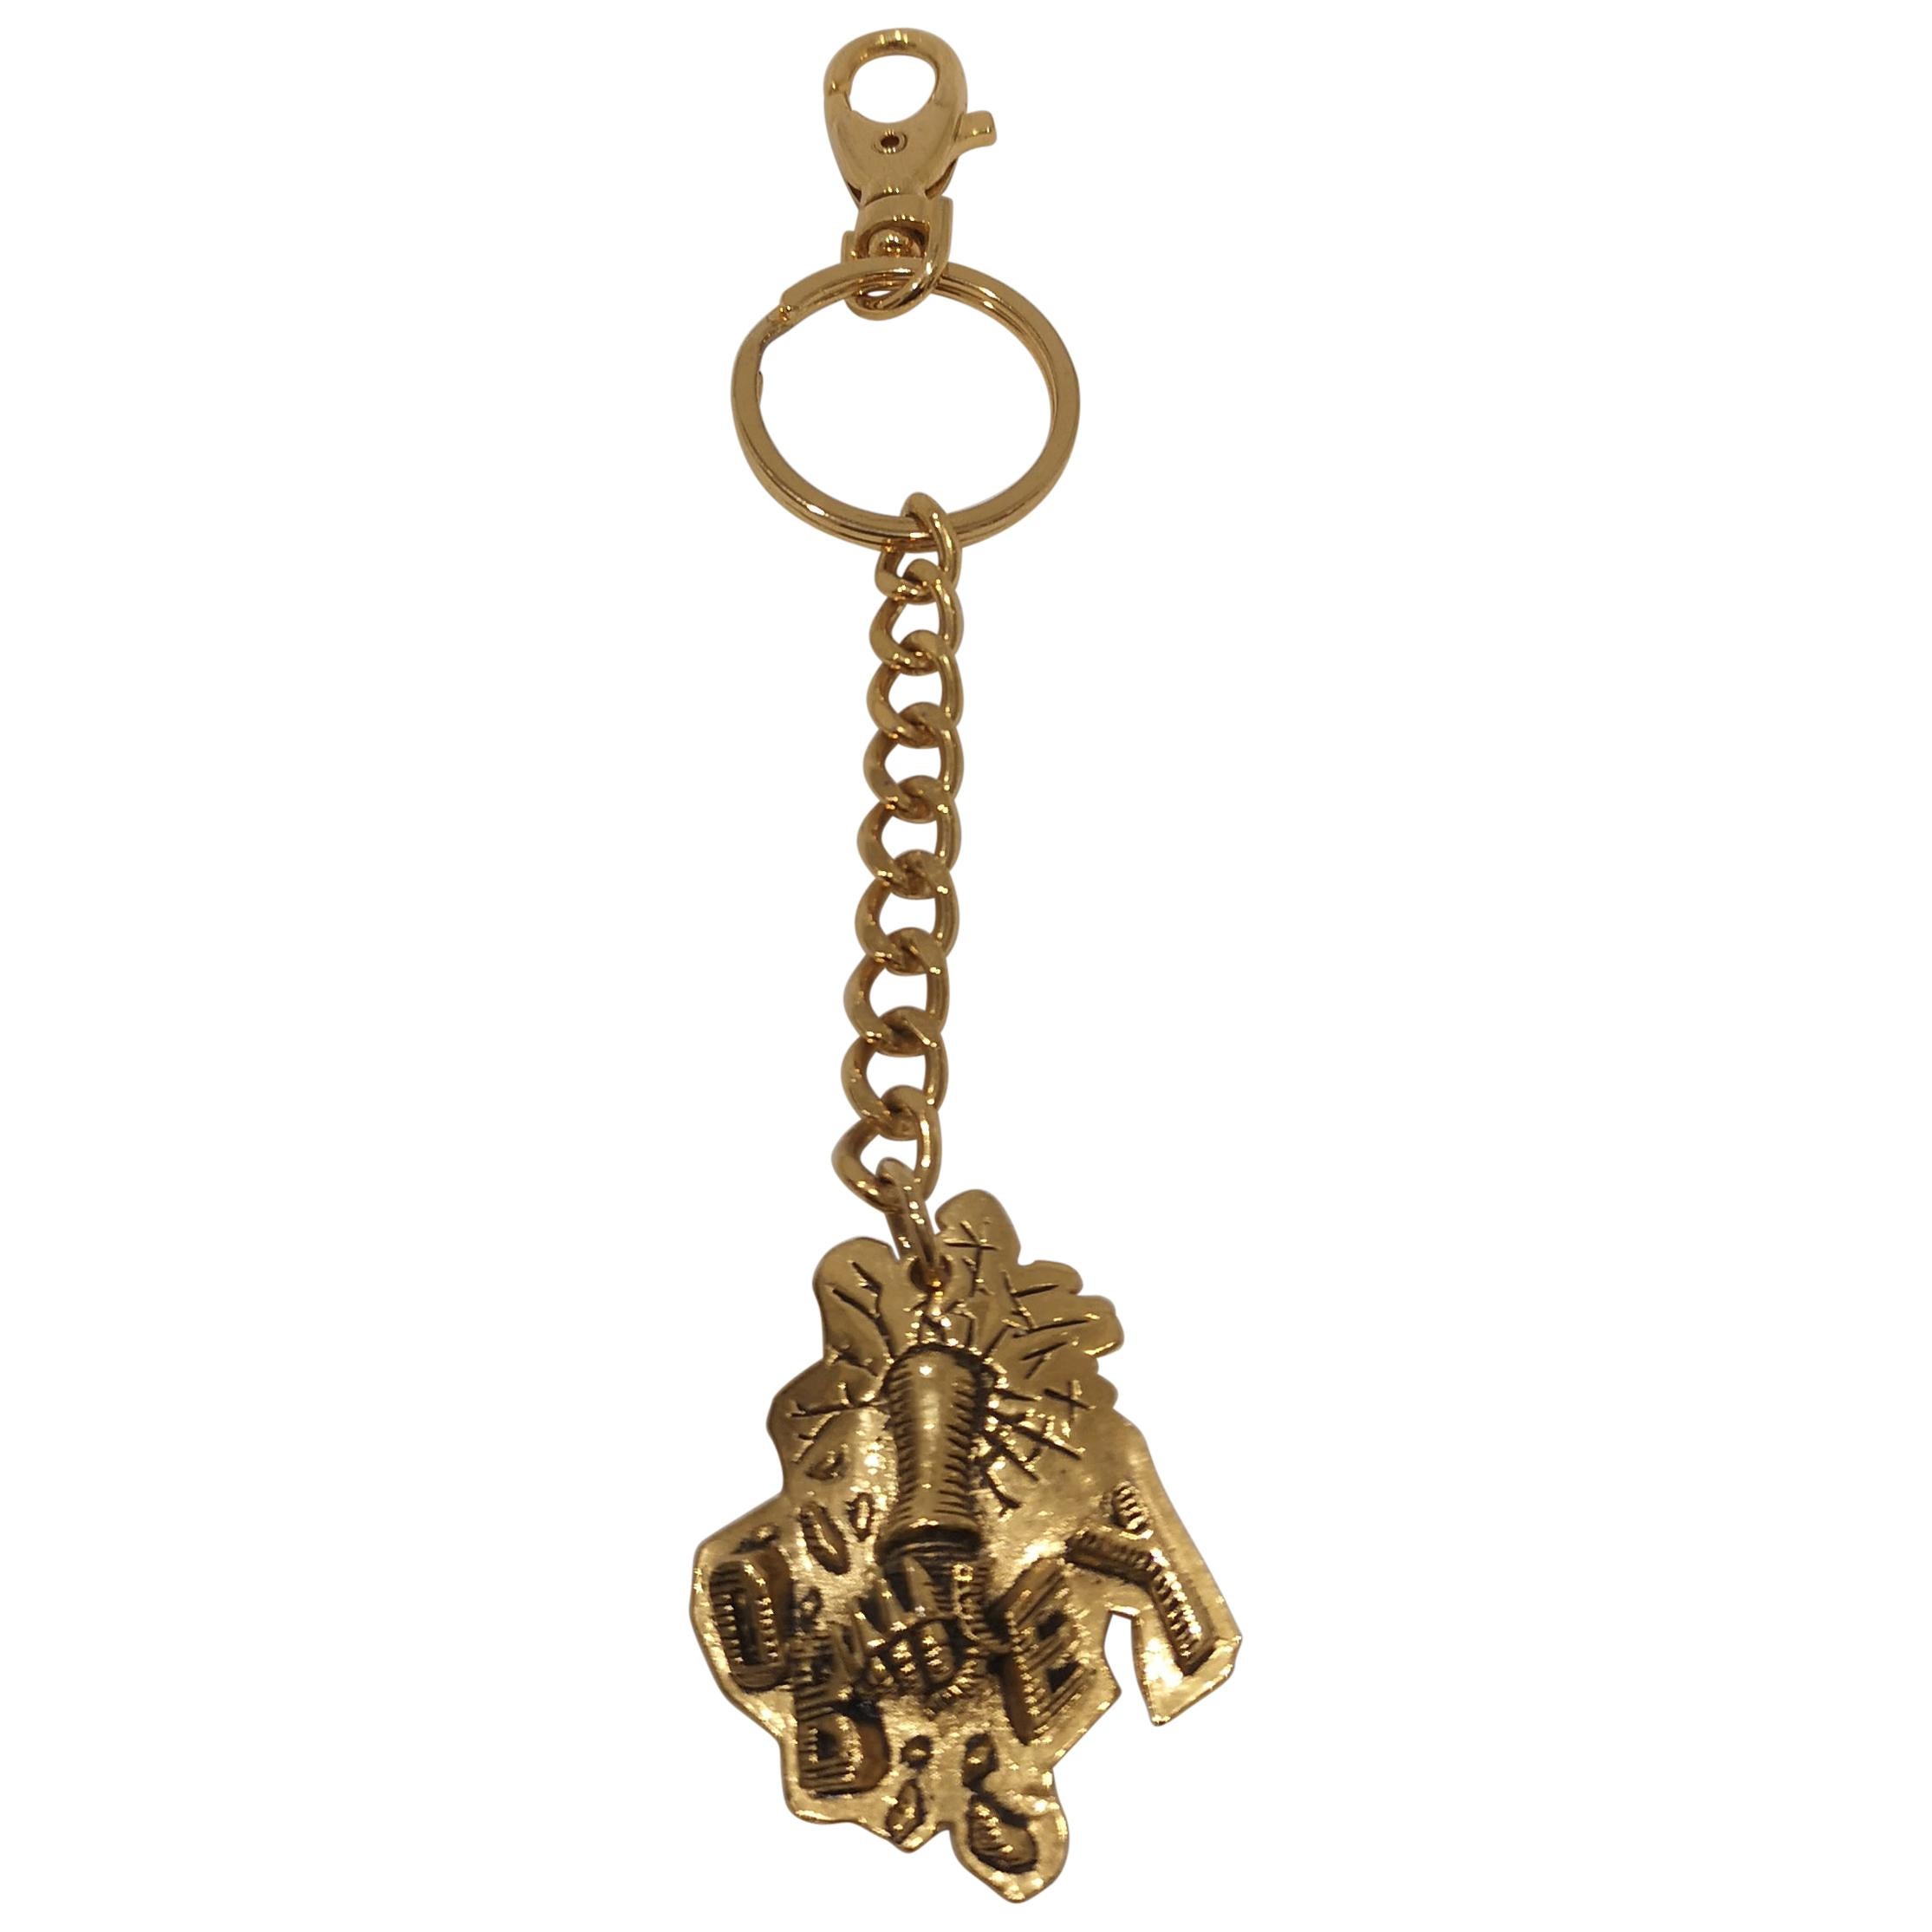 Obey gold tone key chain / accessories